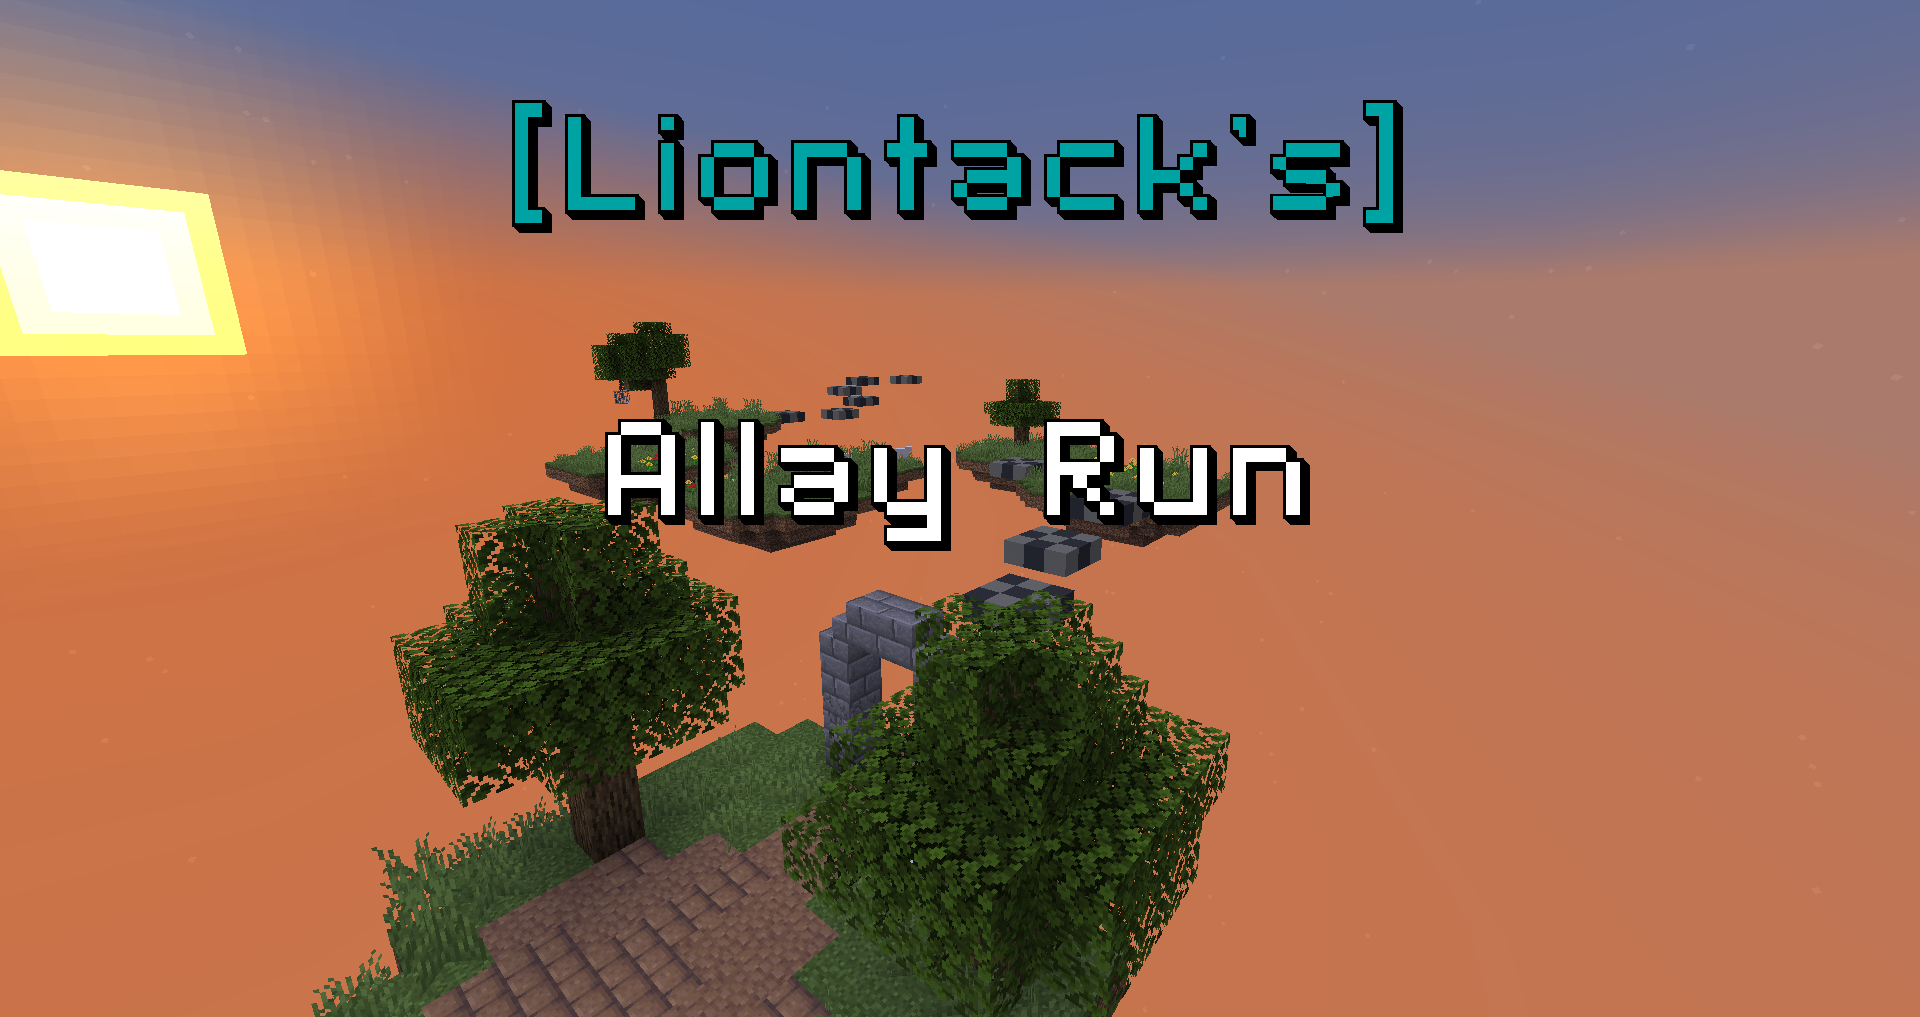 The logo for [Liontack's] Allay Run, a Minecraft Map for 1.20.1 by Liontack